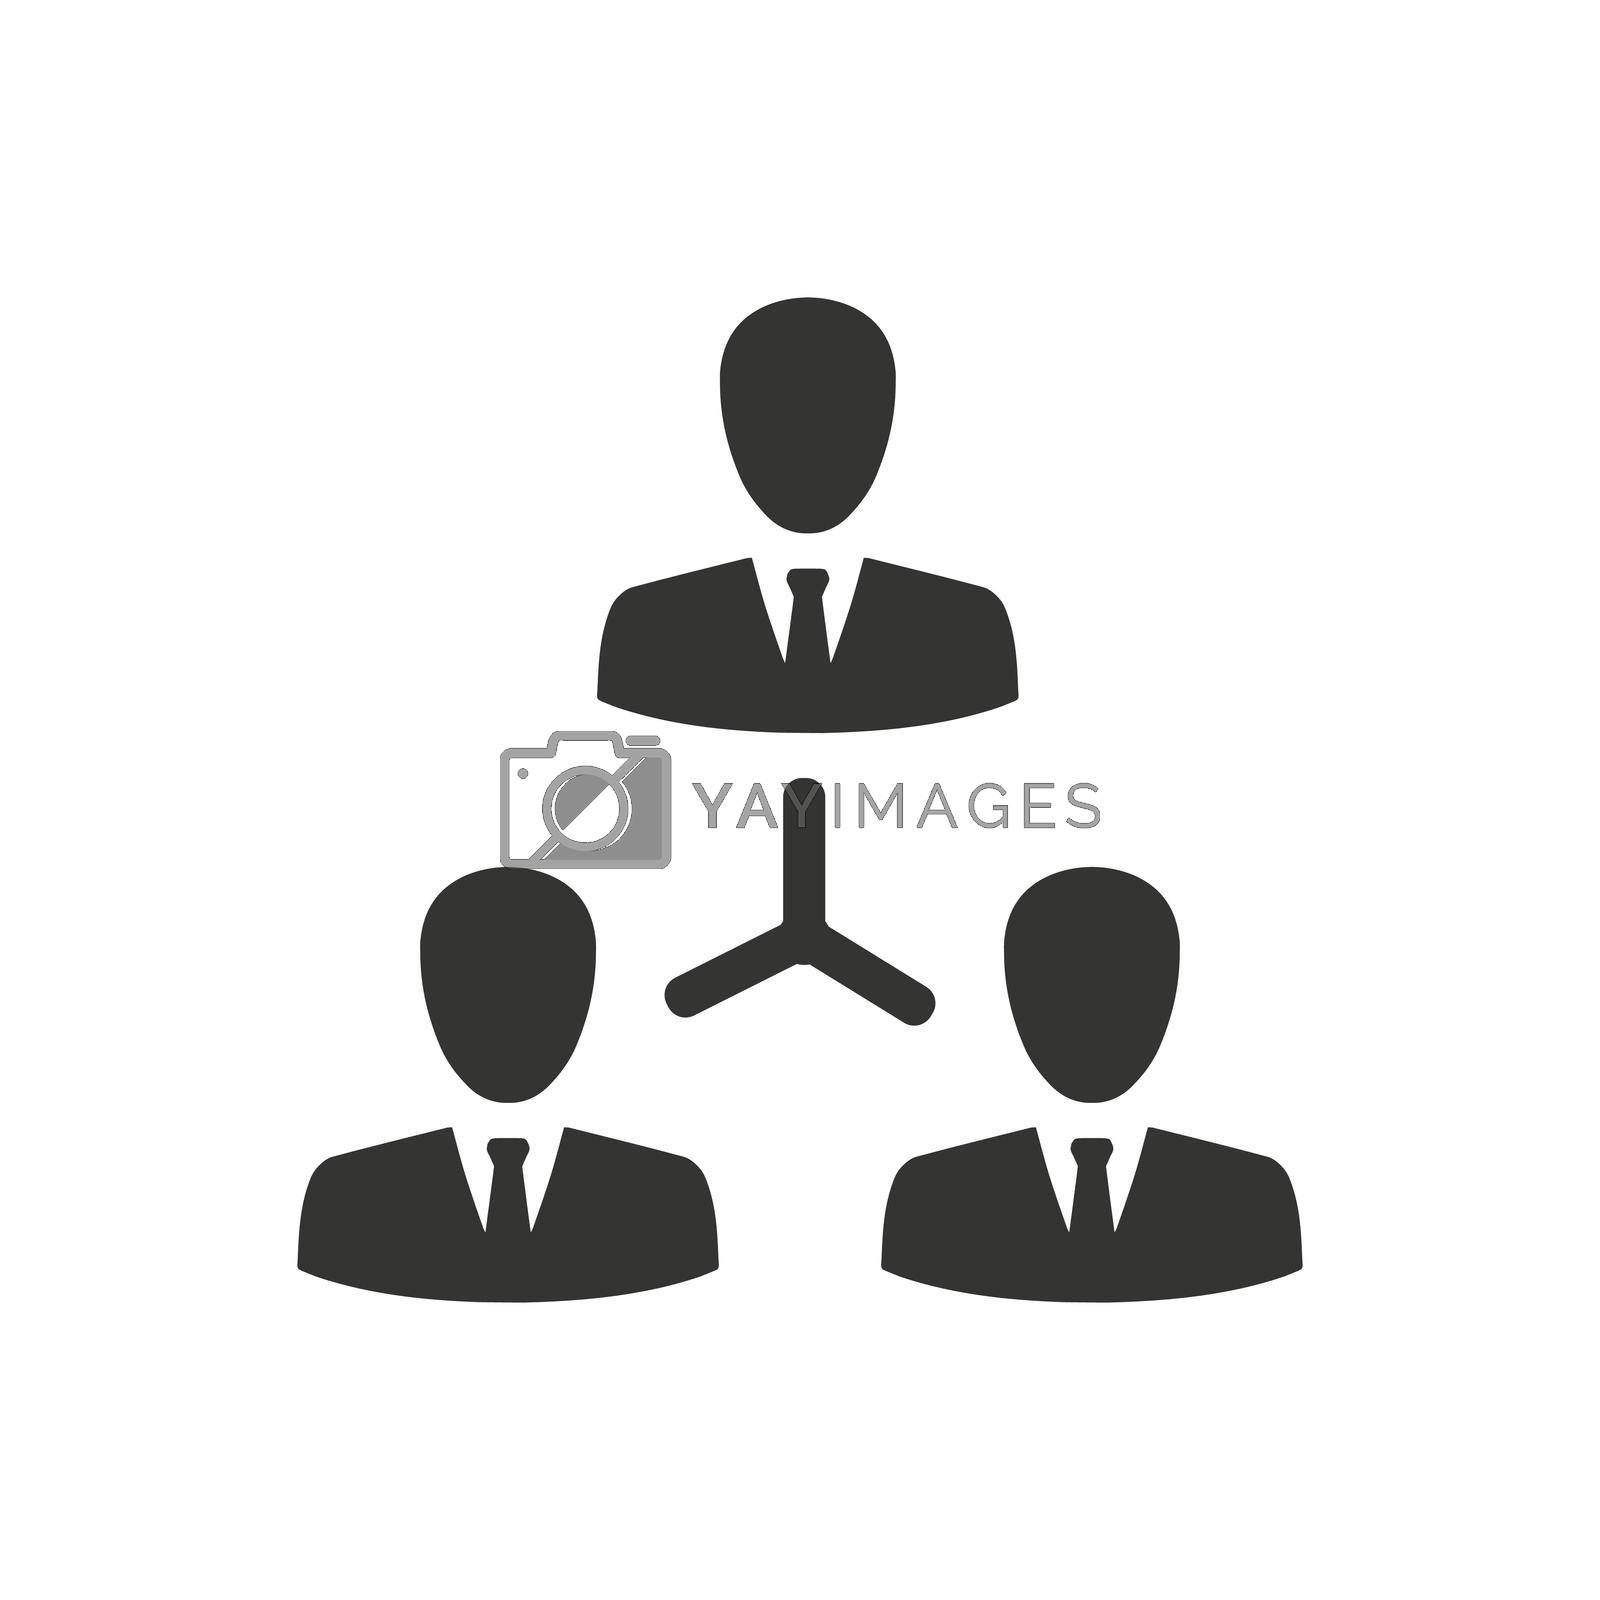 Royalty free image of Teamwork, Communication Icon by delwar018